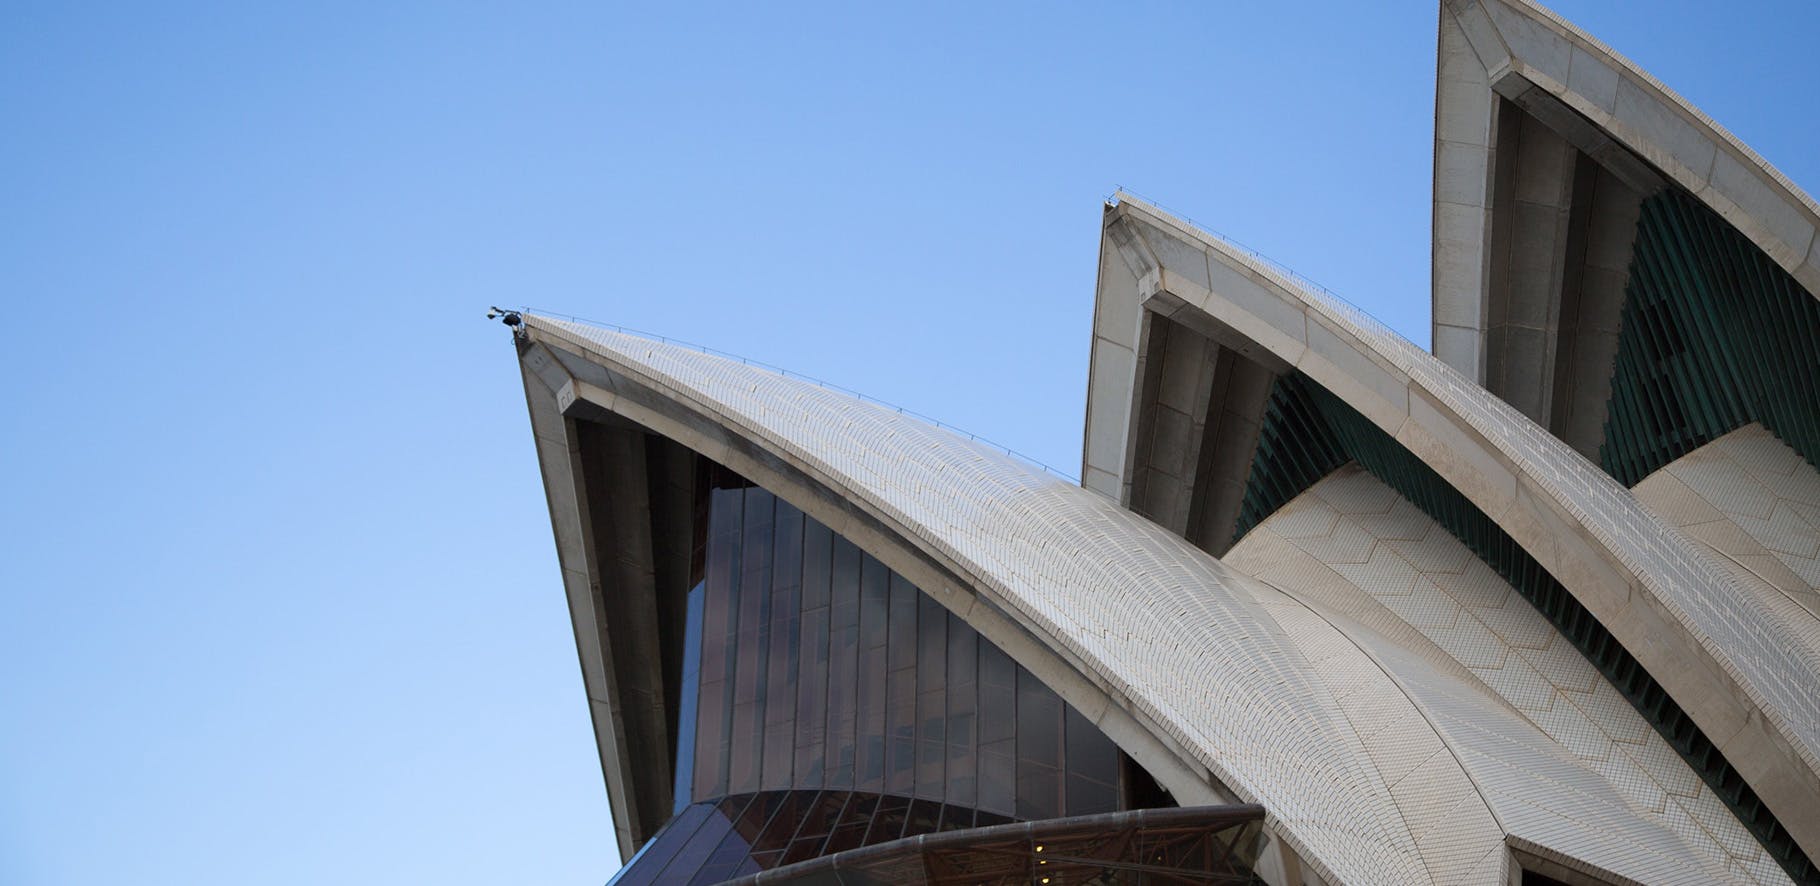 Image showing the top part of the Sydney Opera House